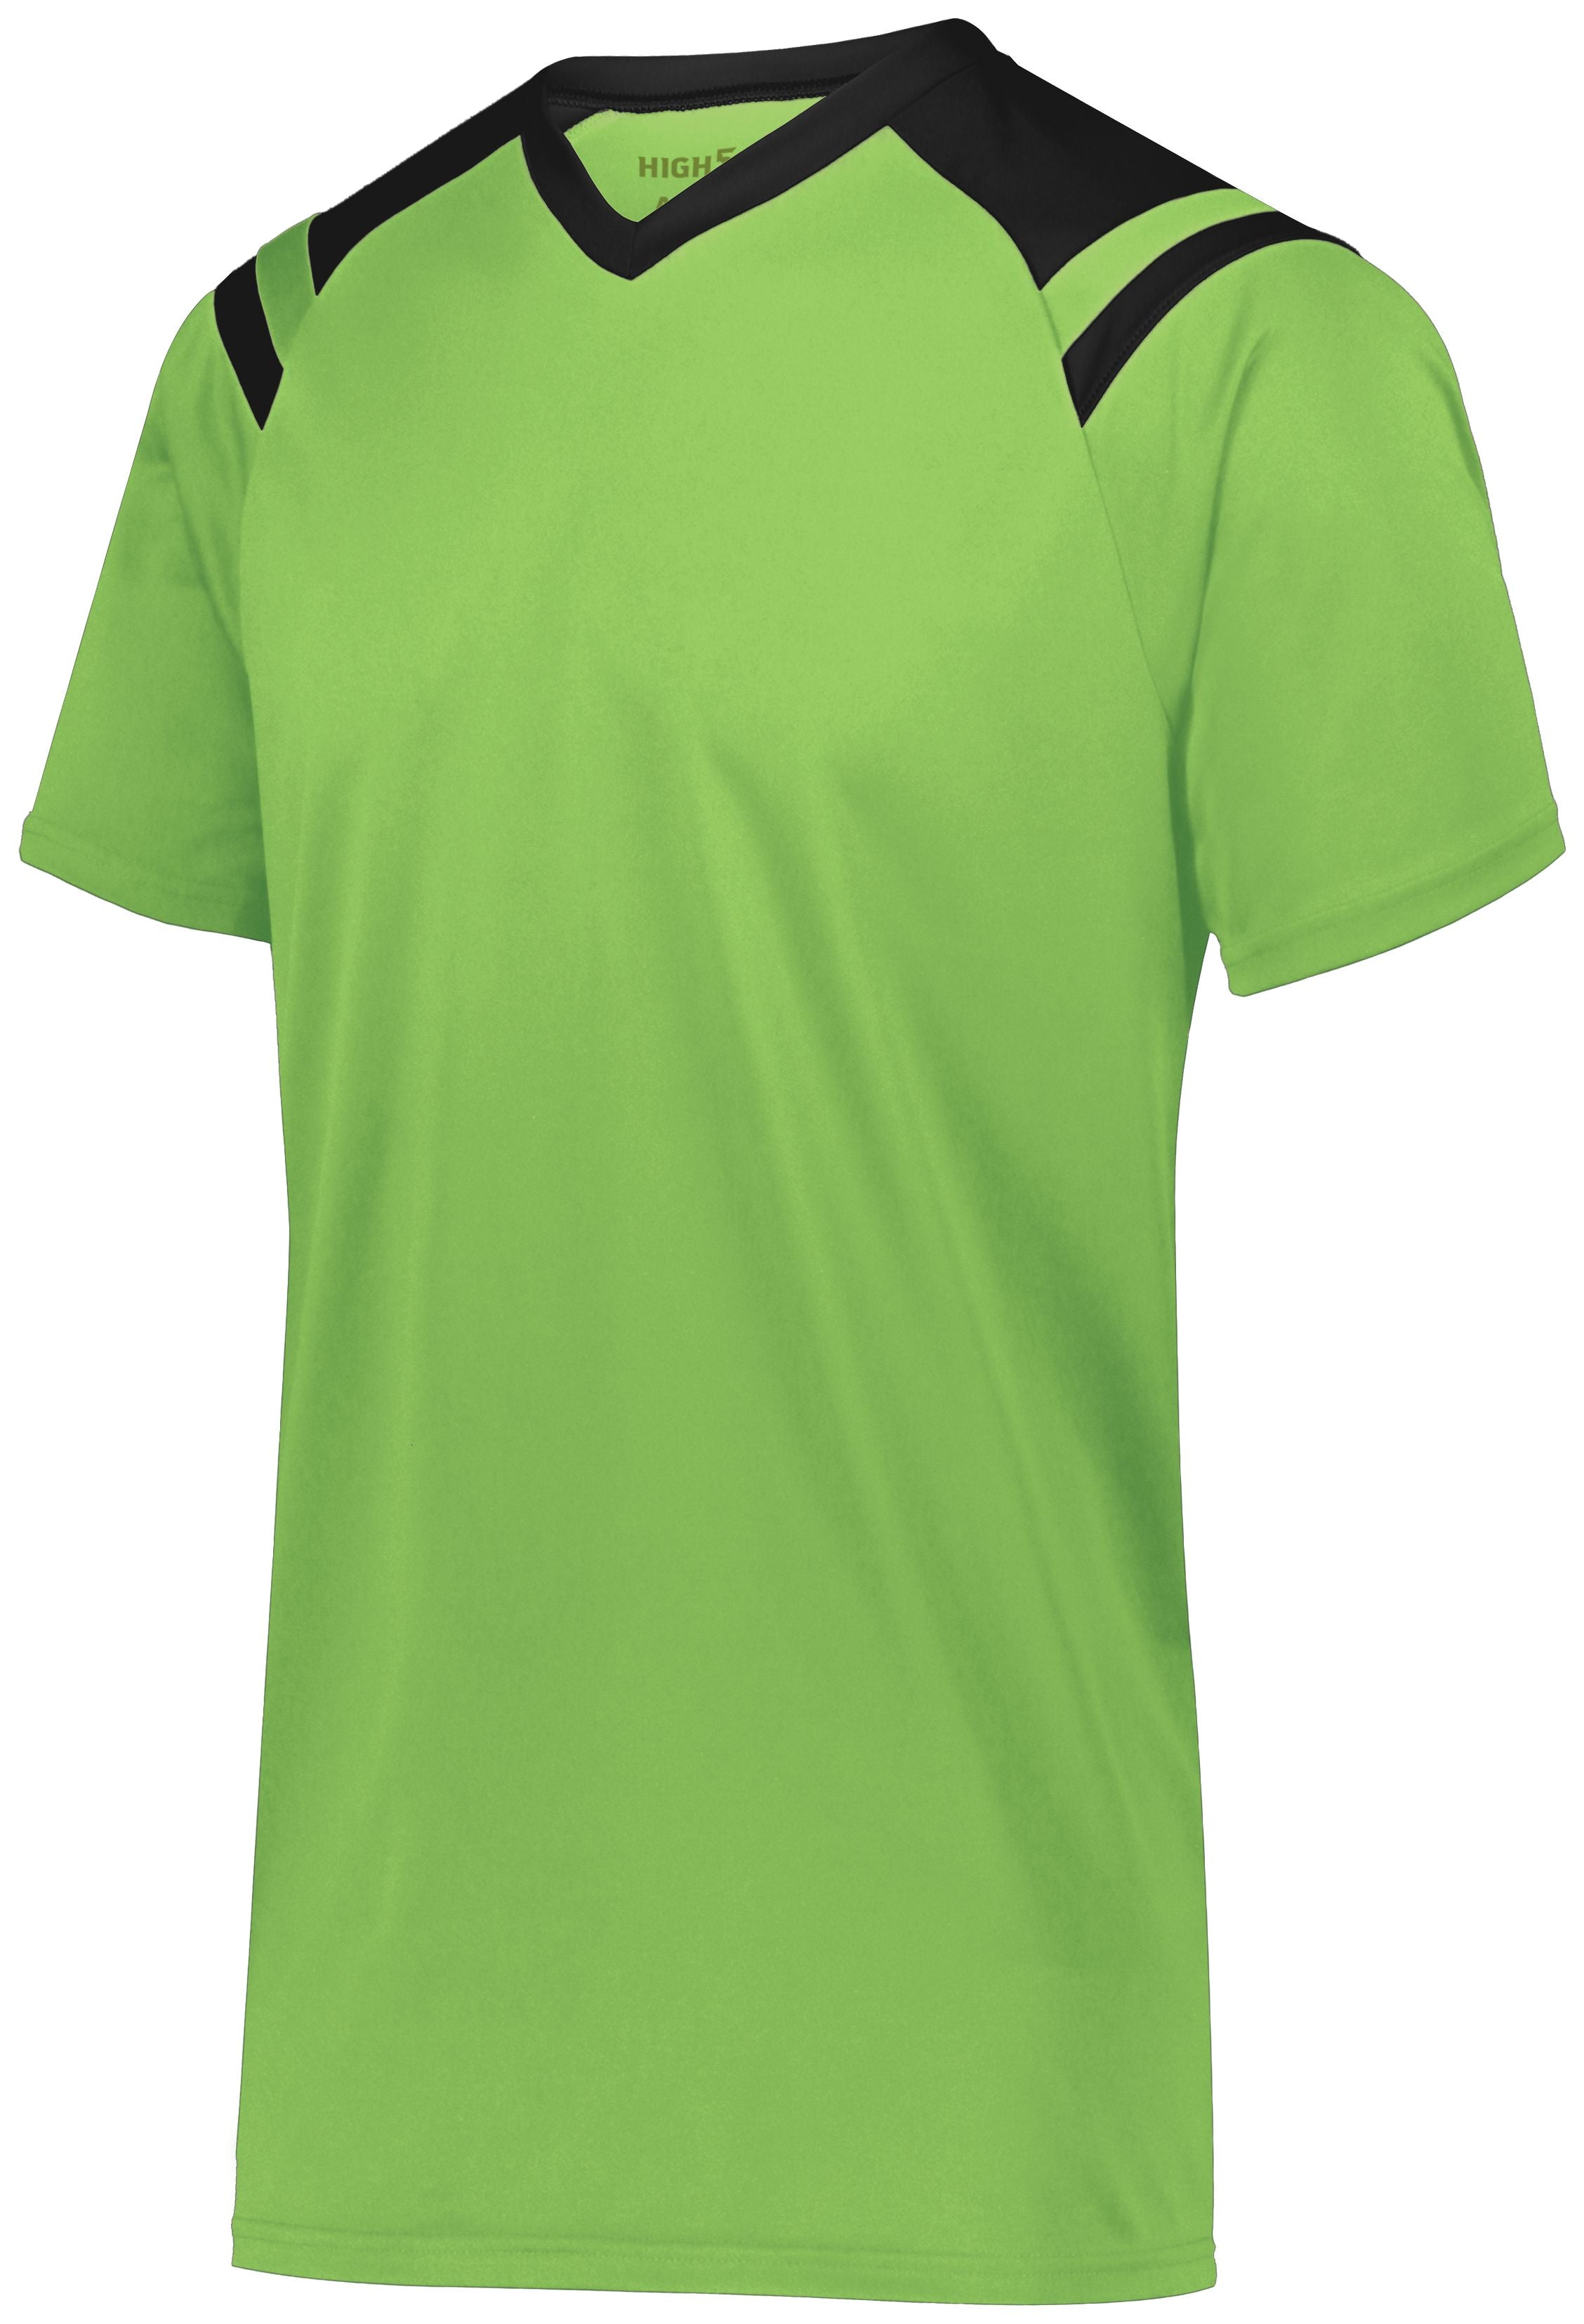 High 5 Youth Sheffield Jersey in Lime/Black  -Part of the Youth, Youth-Jersey, High5-Products, Soccer, Shirts, All-Sports-1, Sheffield-Soccer-Jerseys product lines at KanaleyCreations.com